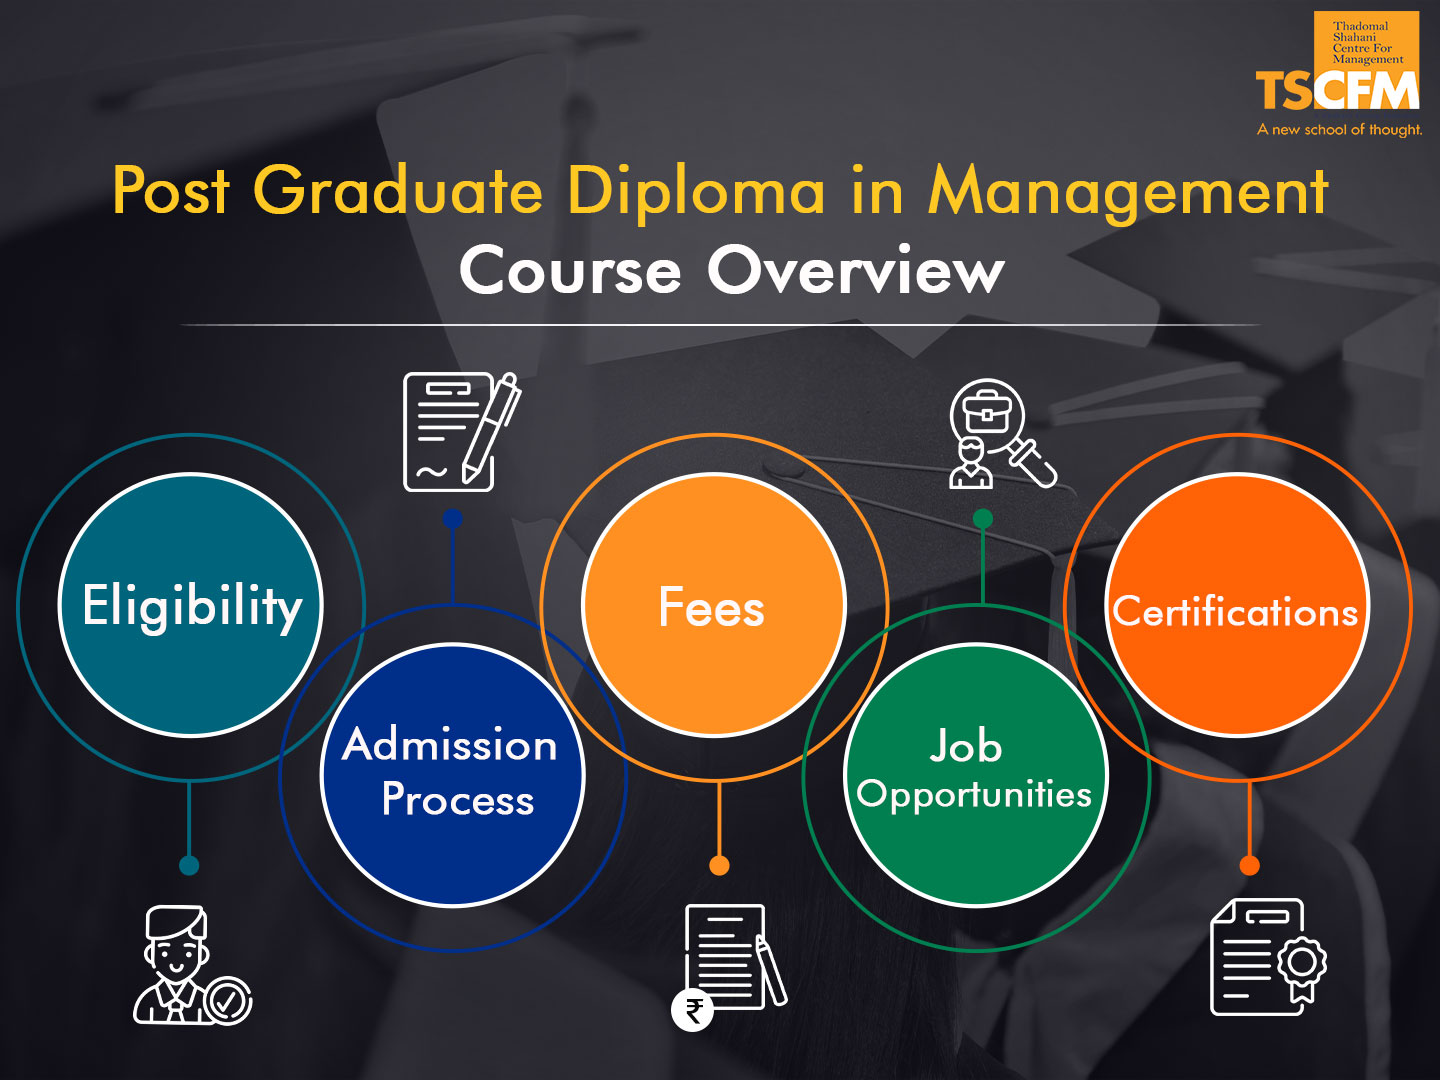 Post Graduation Diploma in Management (PGDM) Fees, Eligibility, Admission, Job Opportunities - TSCFM